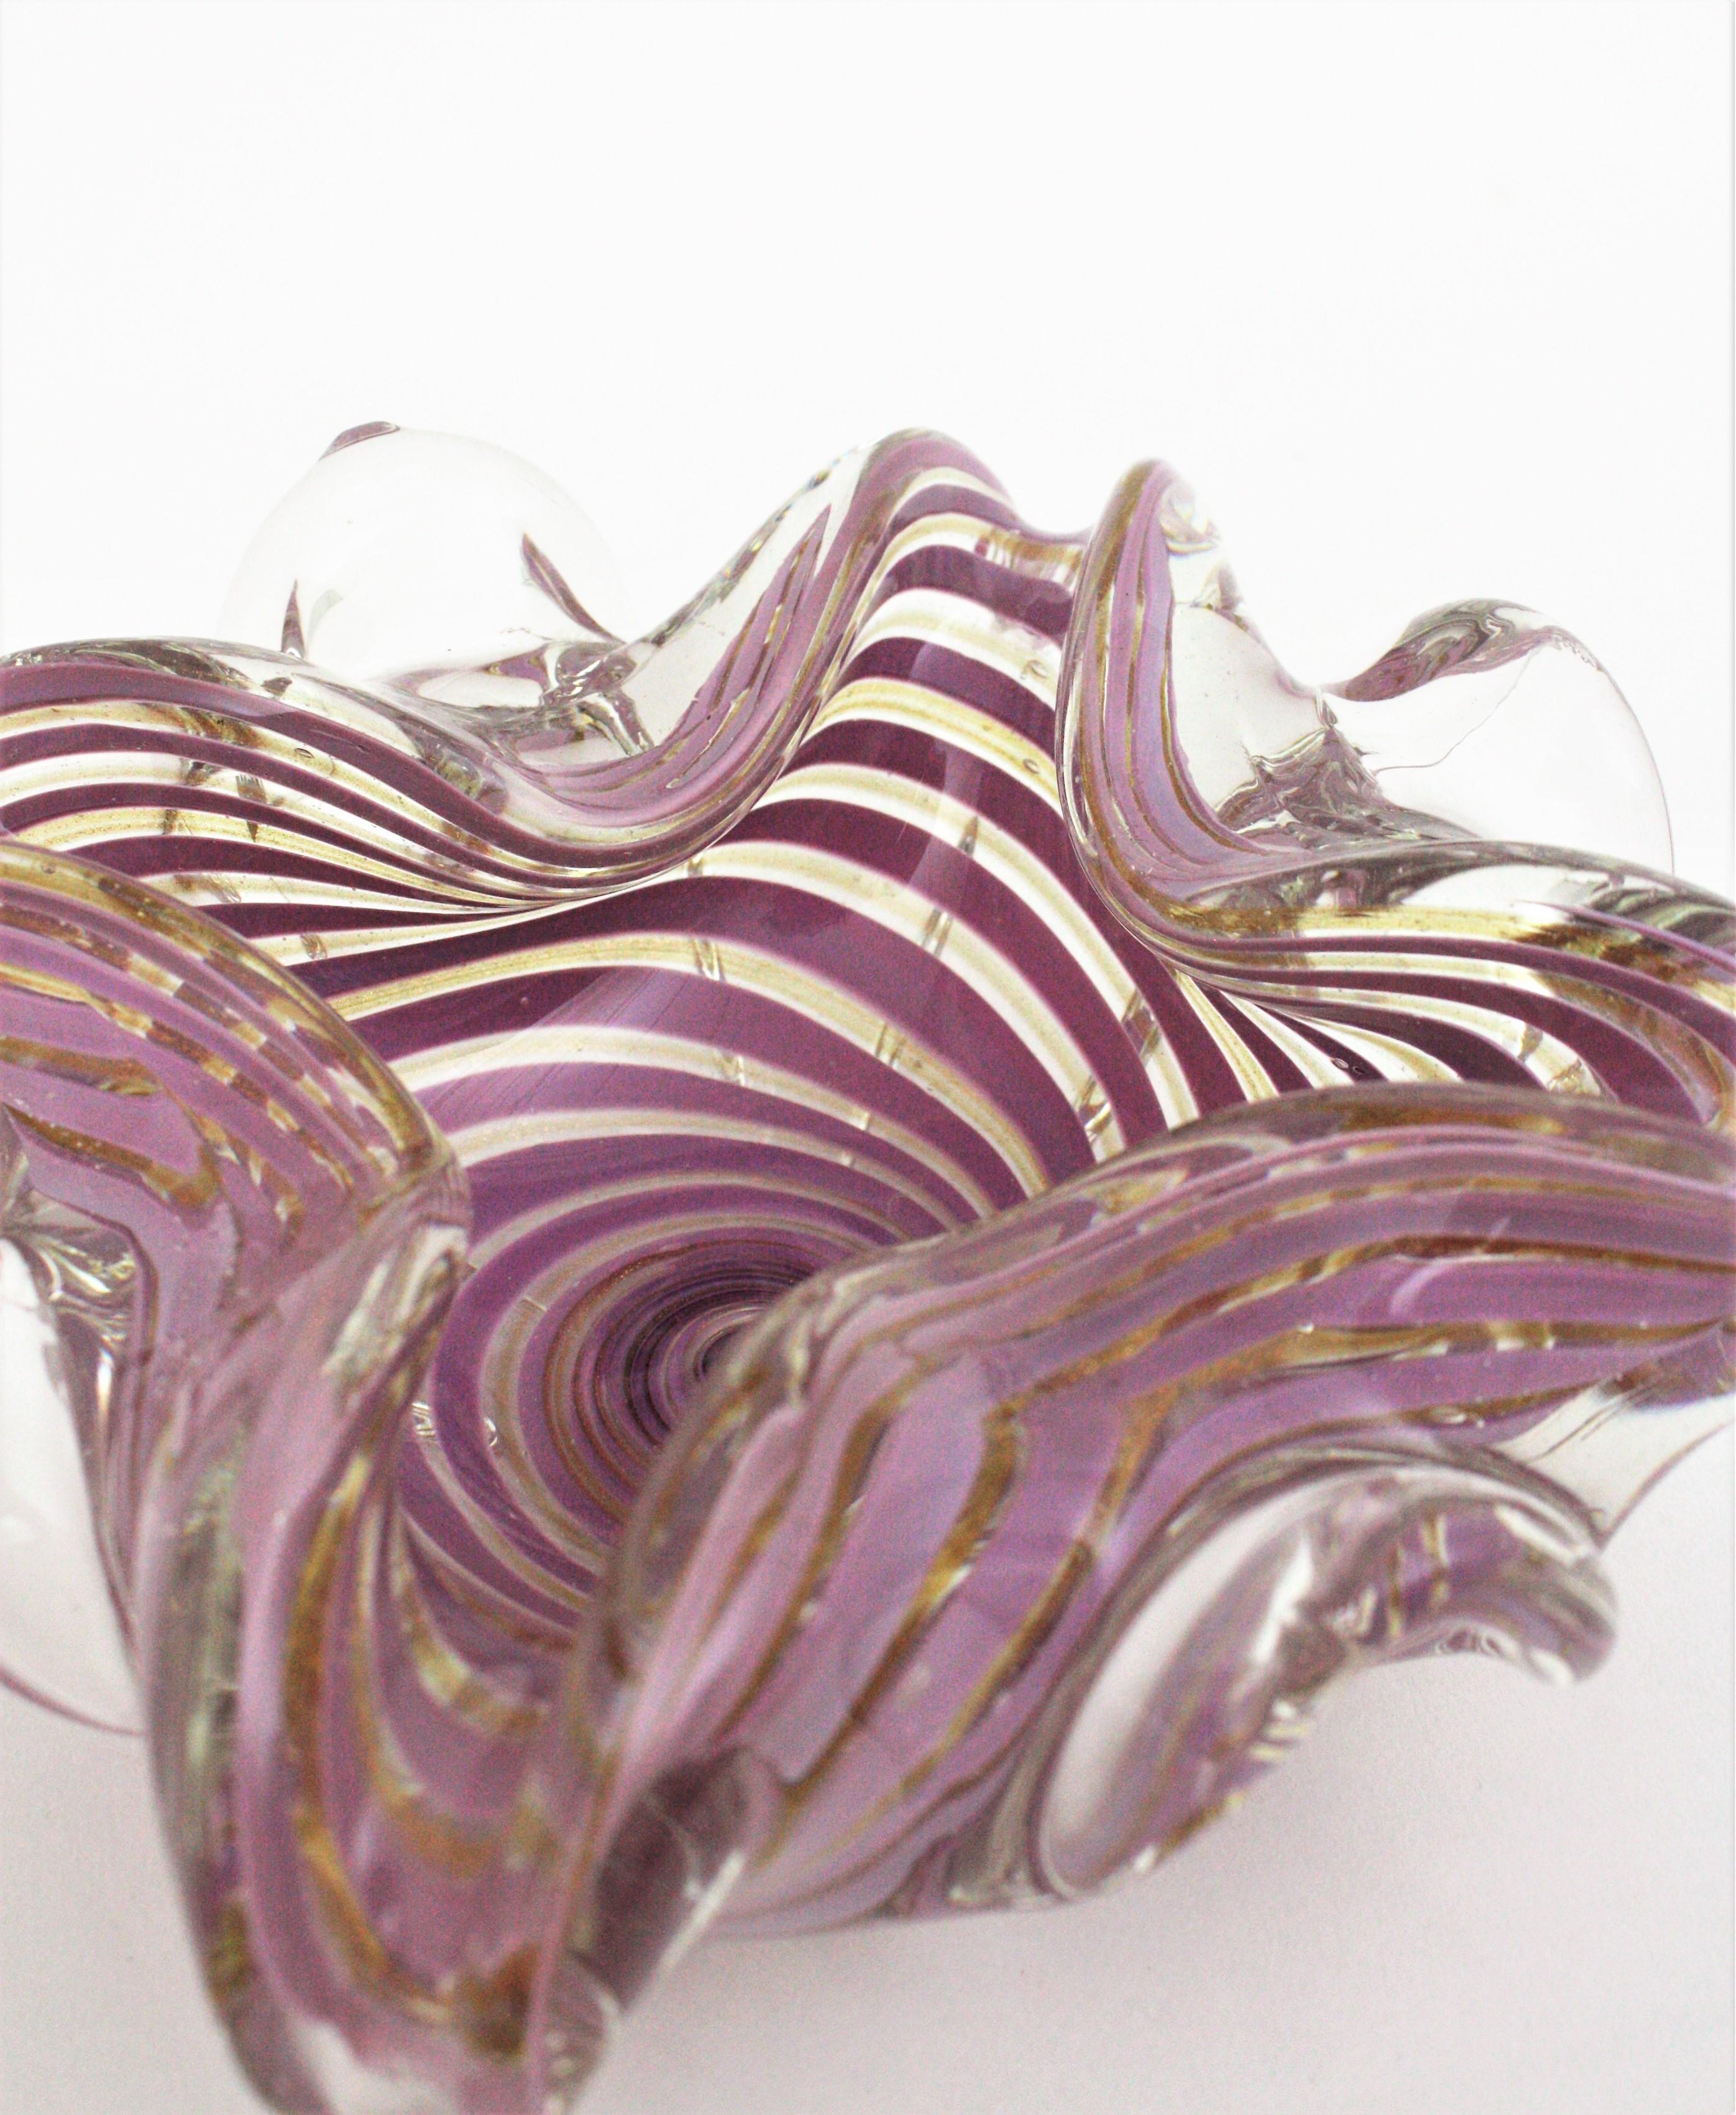 Fratelli Toso Murano Glass Lilac Swirl Ribbons & Gold Dust Large Bowl / Ashtray For Sale 8